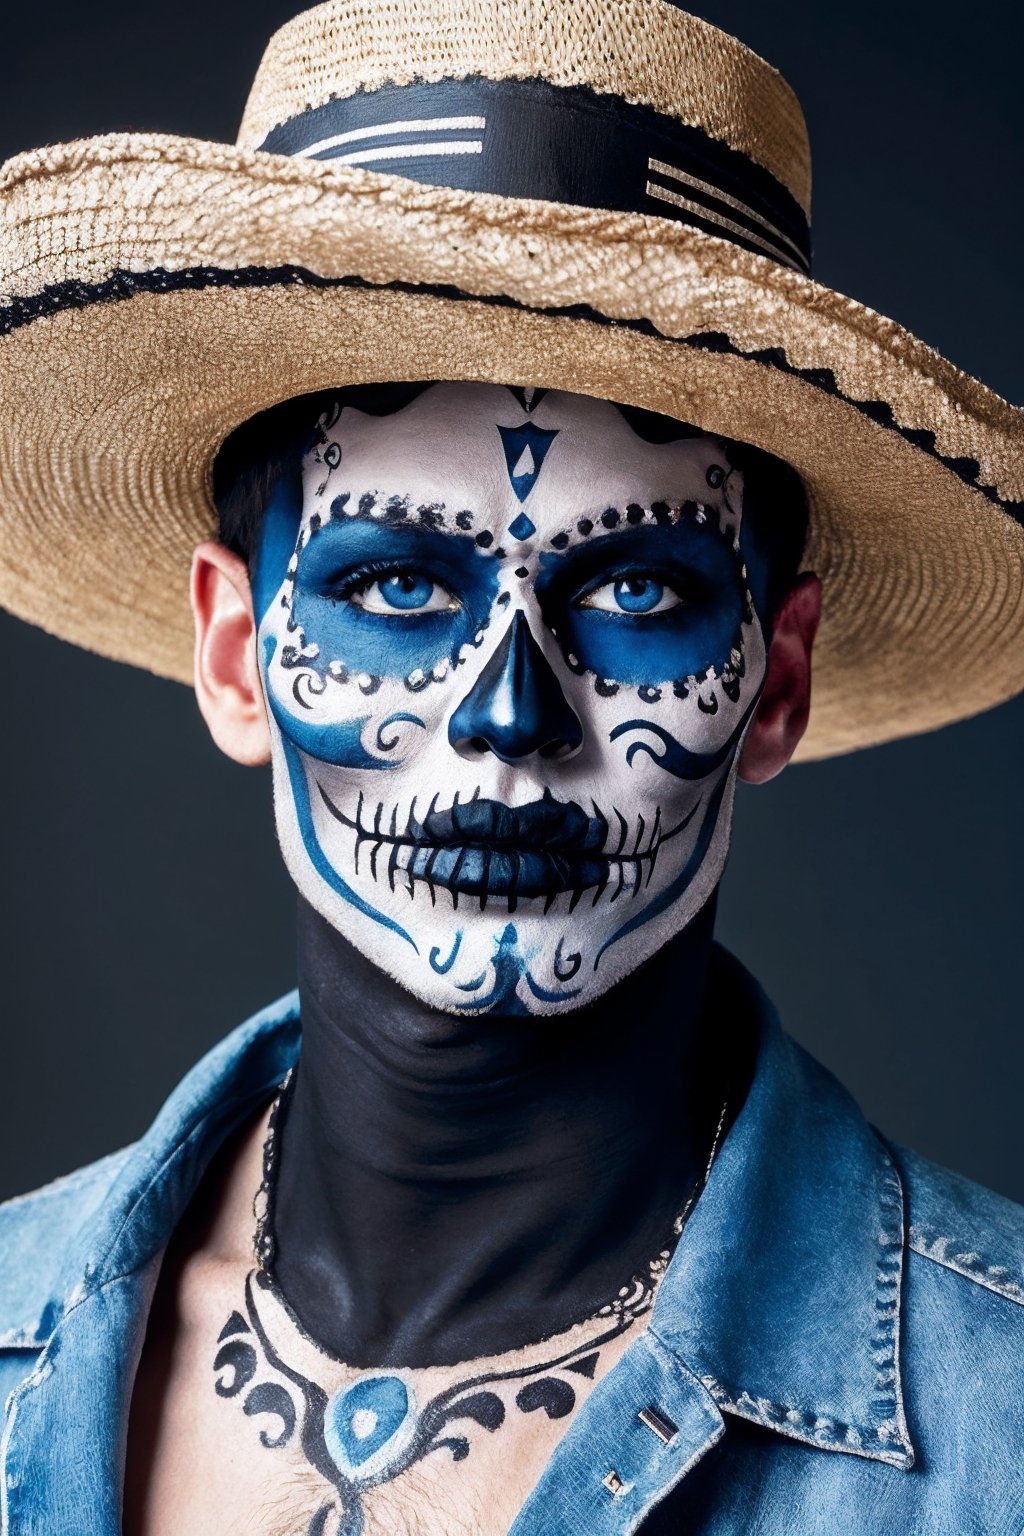 (Best quality, 8k, 32k, Masterpiece, UHD:1.2),  1guy, a close up of a guy with Catrin make up, dia de los muertos, dia de los muertos,  black base make up, blue white black makeup,  emulating a skull with the make up,  sombrero black and blue,  wearing charro clothes, detailed face and body, masculine face, masculine features, rugged textured face, detailed perfect face, face retouched, light blue eyes, realistic portrait photo, high quality portrait, and attractive features, eyes, eyelid,  focus, depth of field, film grain, ray tracing, detailed fabric rendering, detailed natural real skin texture, visible skin pores, anatomically correct, :X,(PnMakeEnh)